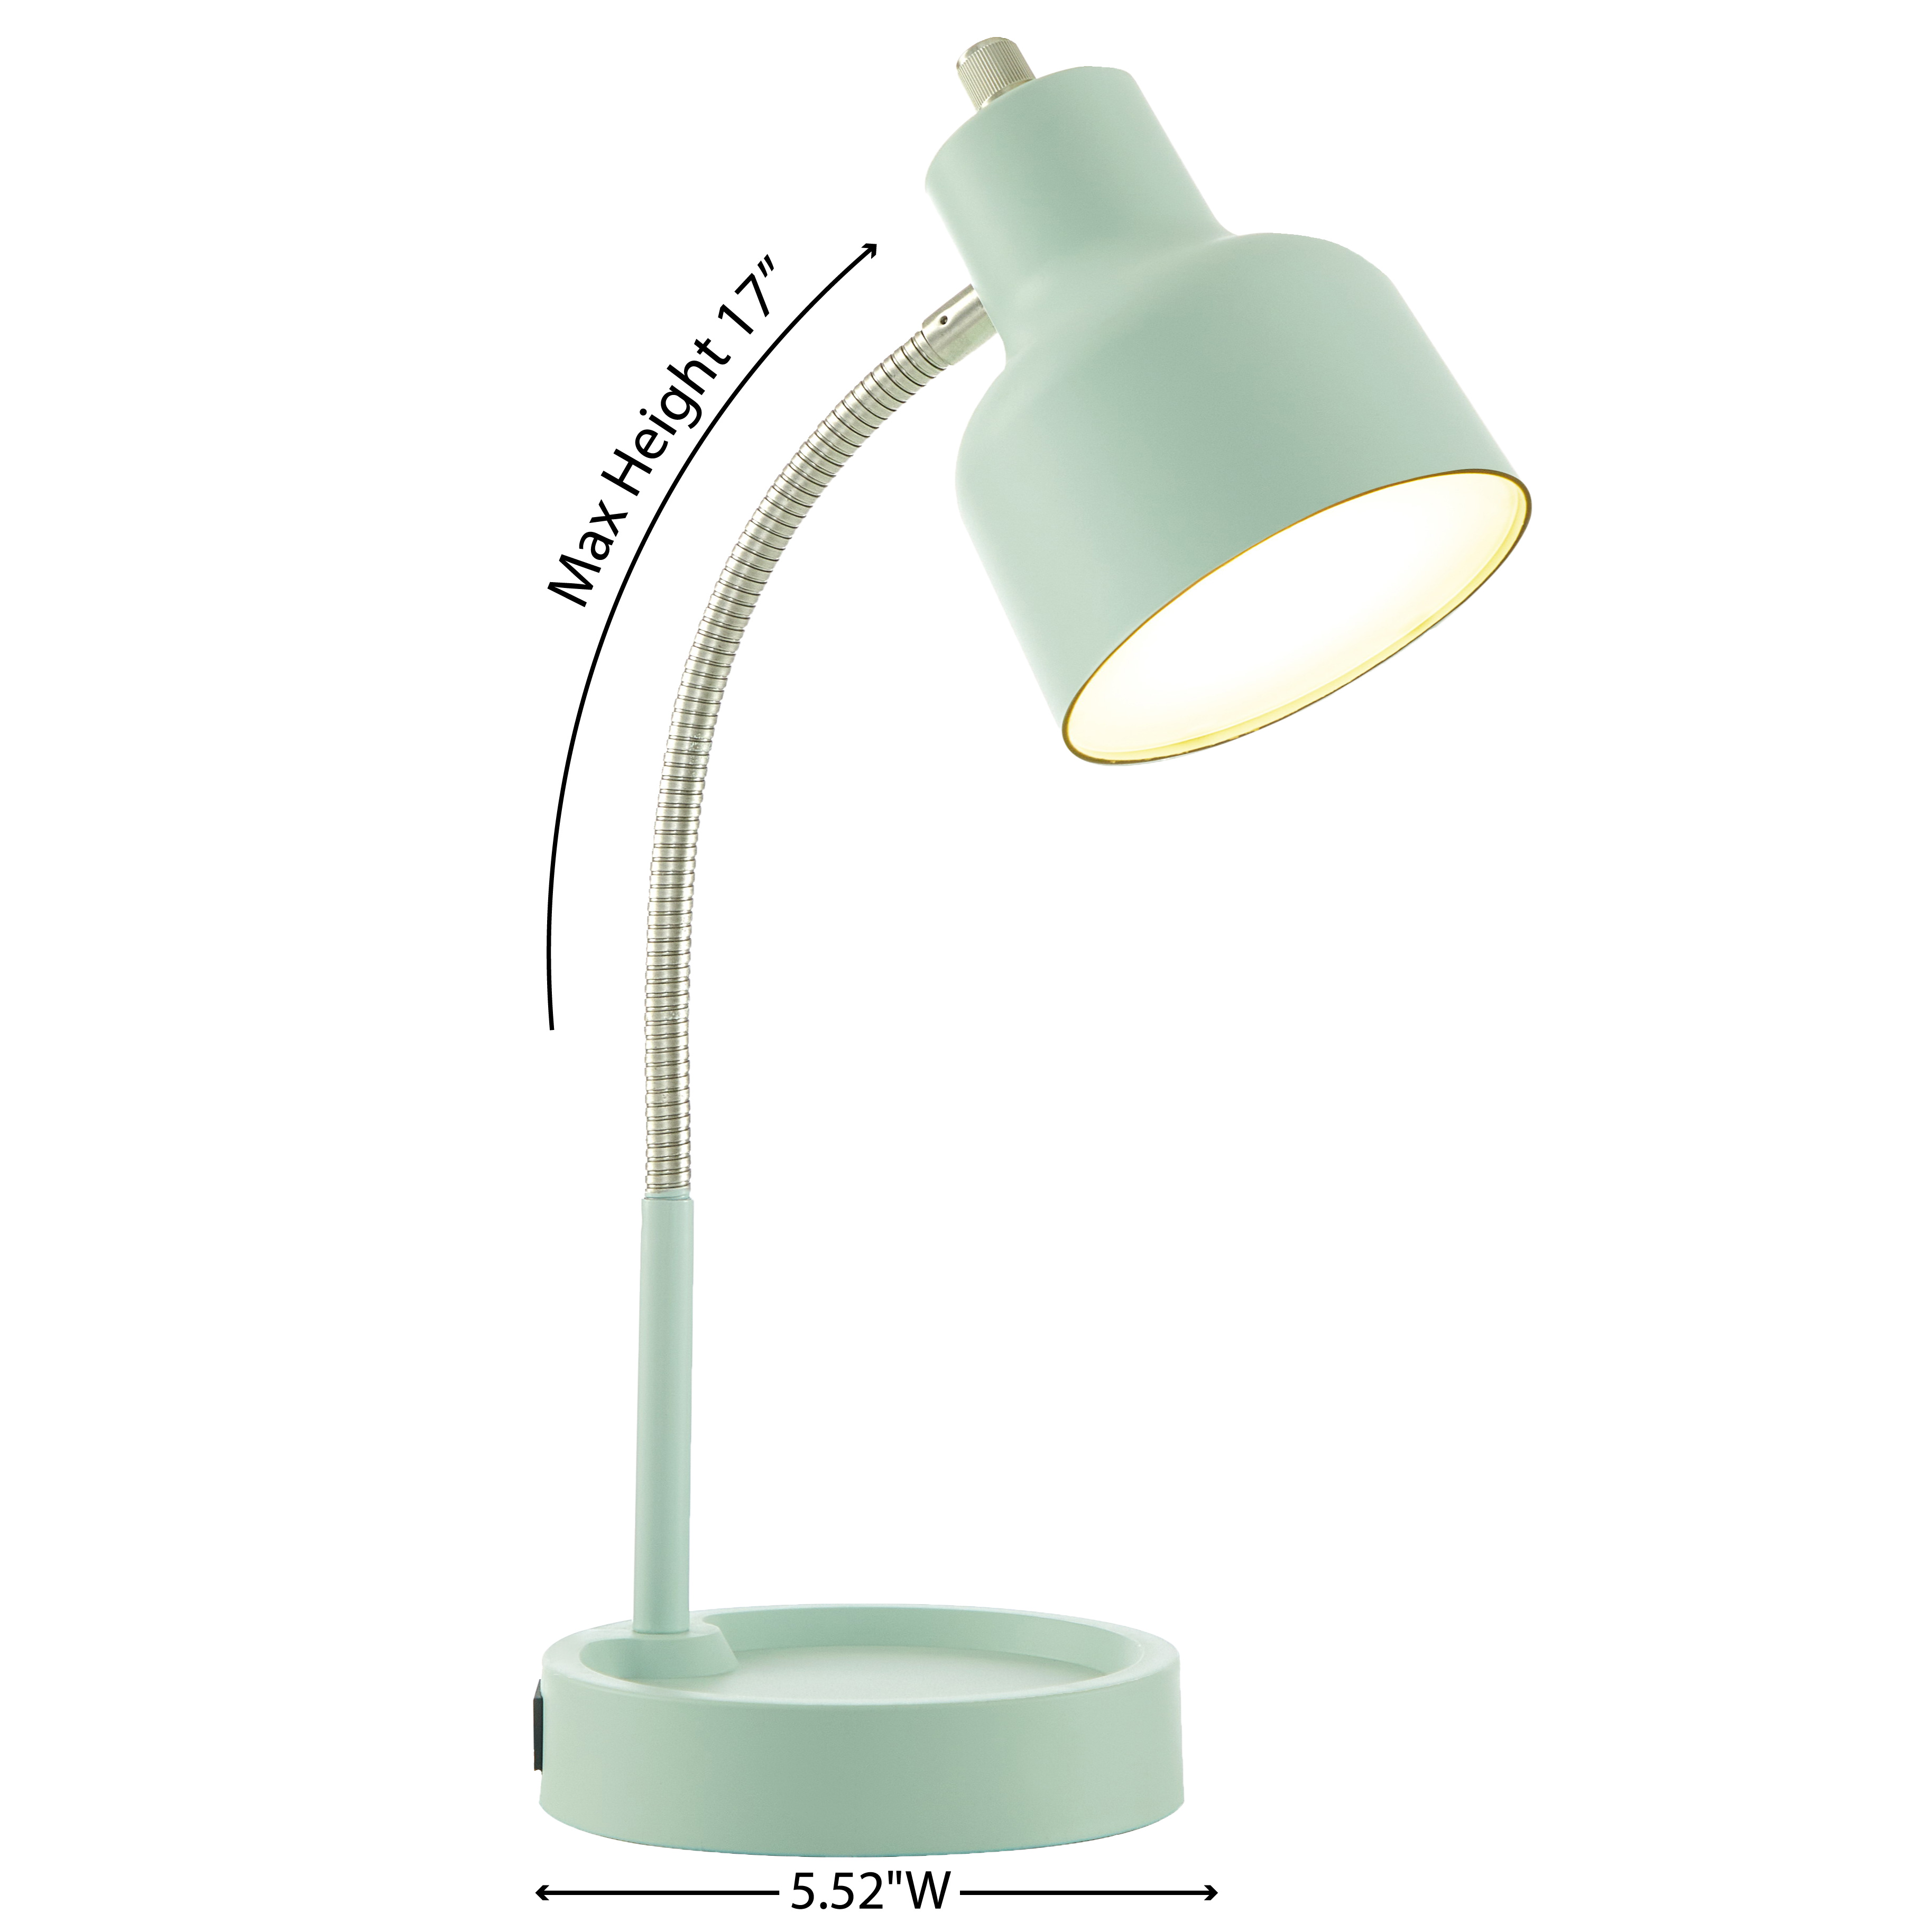 Mainstays LED Desk Lamp with Catch-All Base & AC Outlet, Matte Mint Green - image 3 of 11